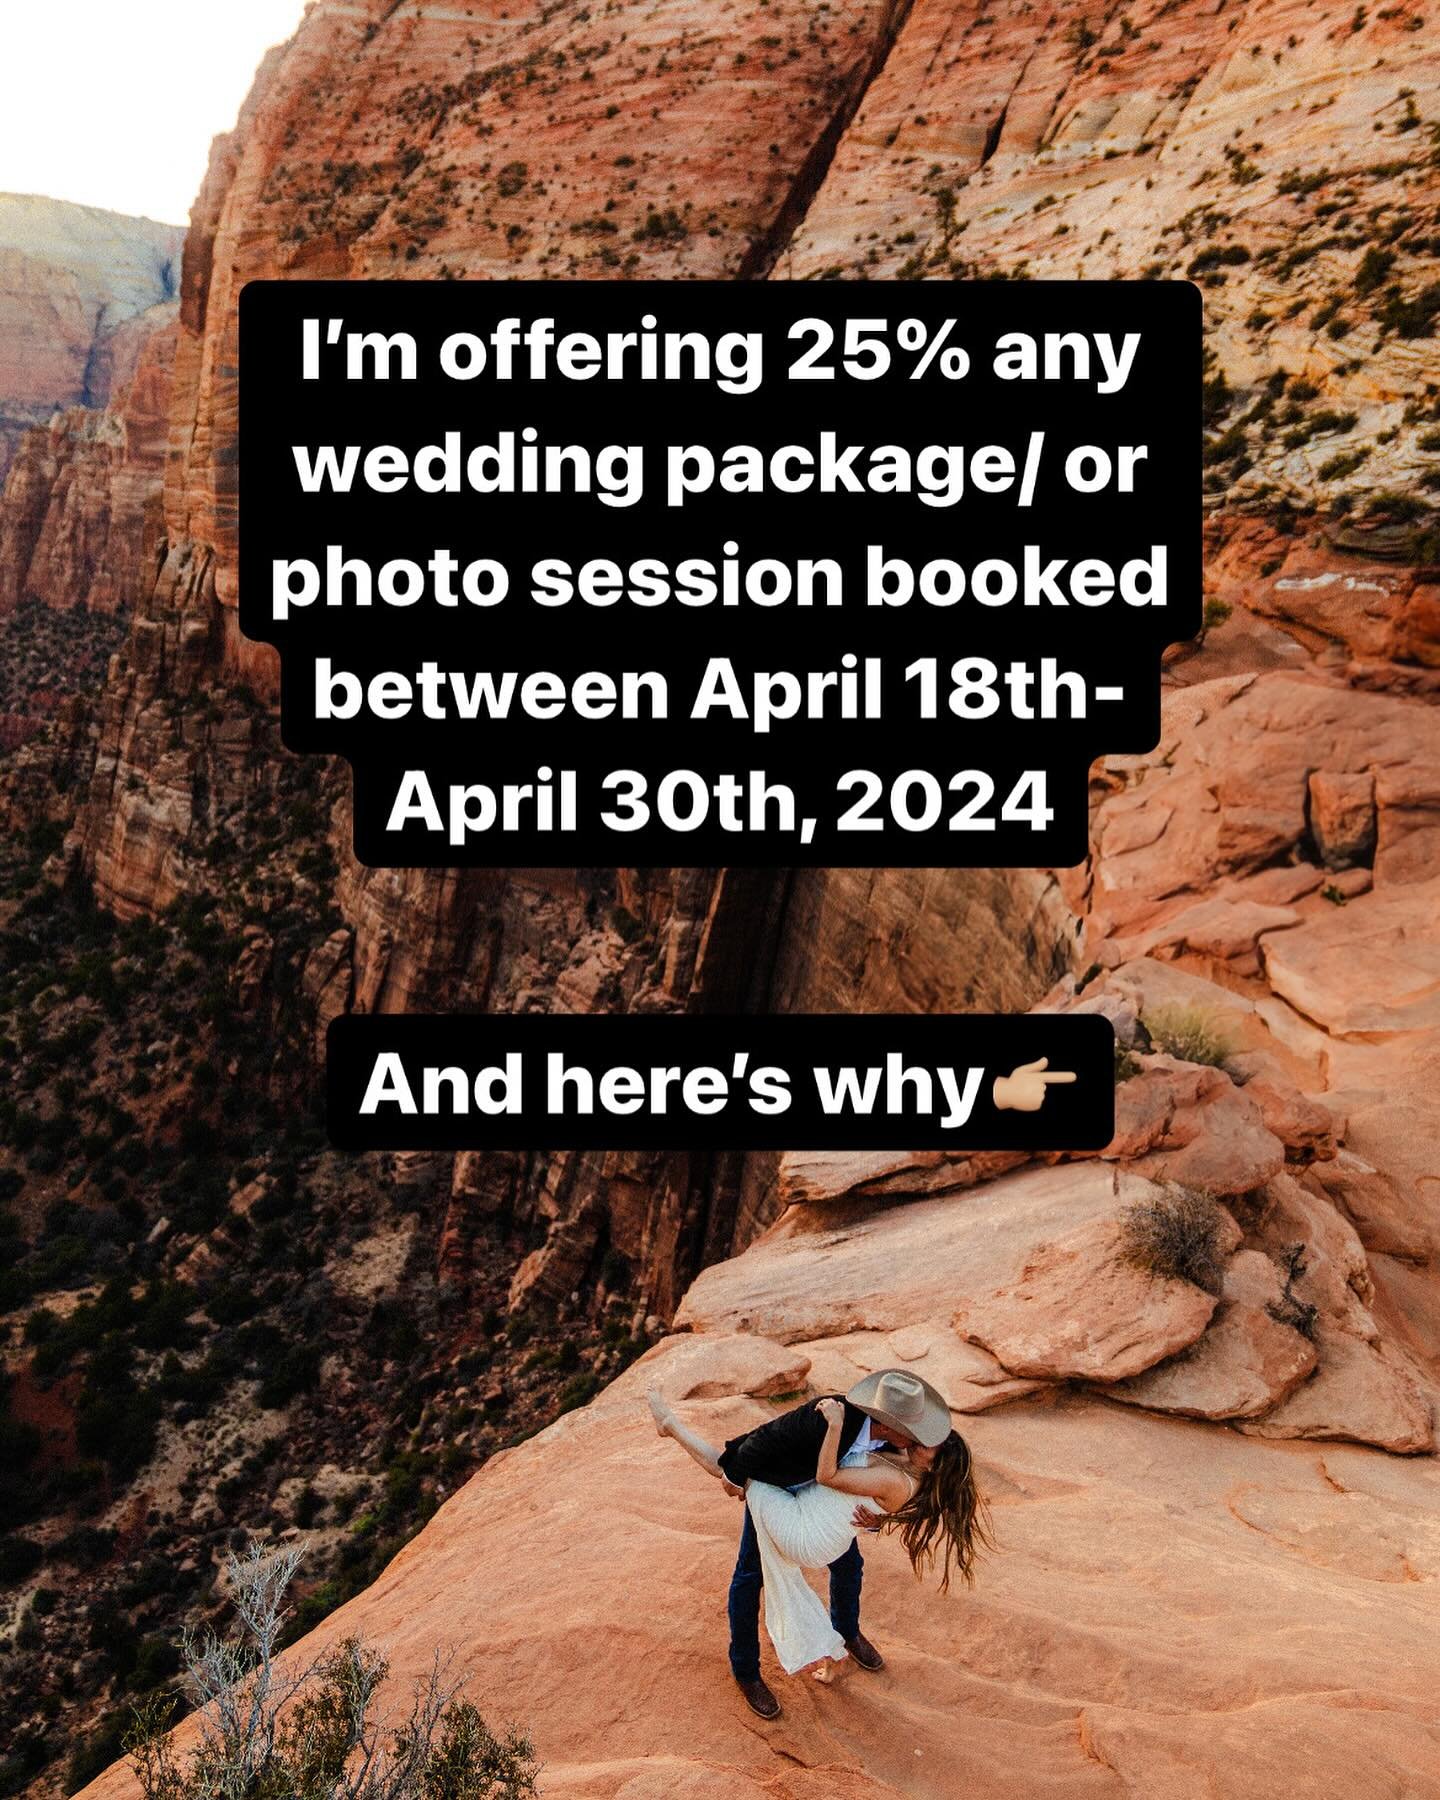 I&rsquo;M OFFERING 25% OFF ANY PHOTO PACKAGE BOOKED BETWEEN NOW AND THE END OF APRIL.

I&rsquo;m in this phase of my life where I just feel like being super transparent.

I just want you to know when you book with me? I will do everything in my power